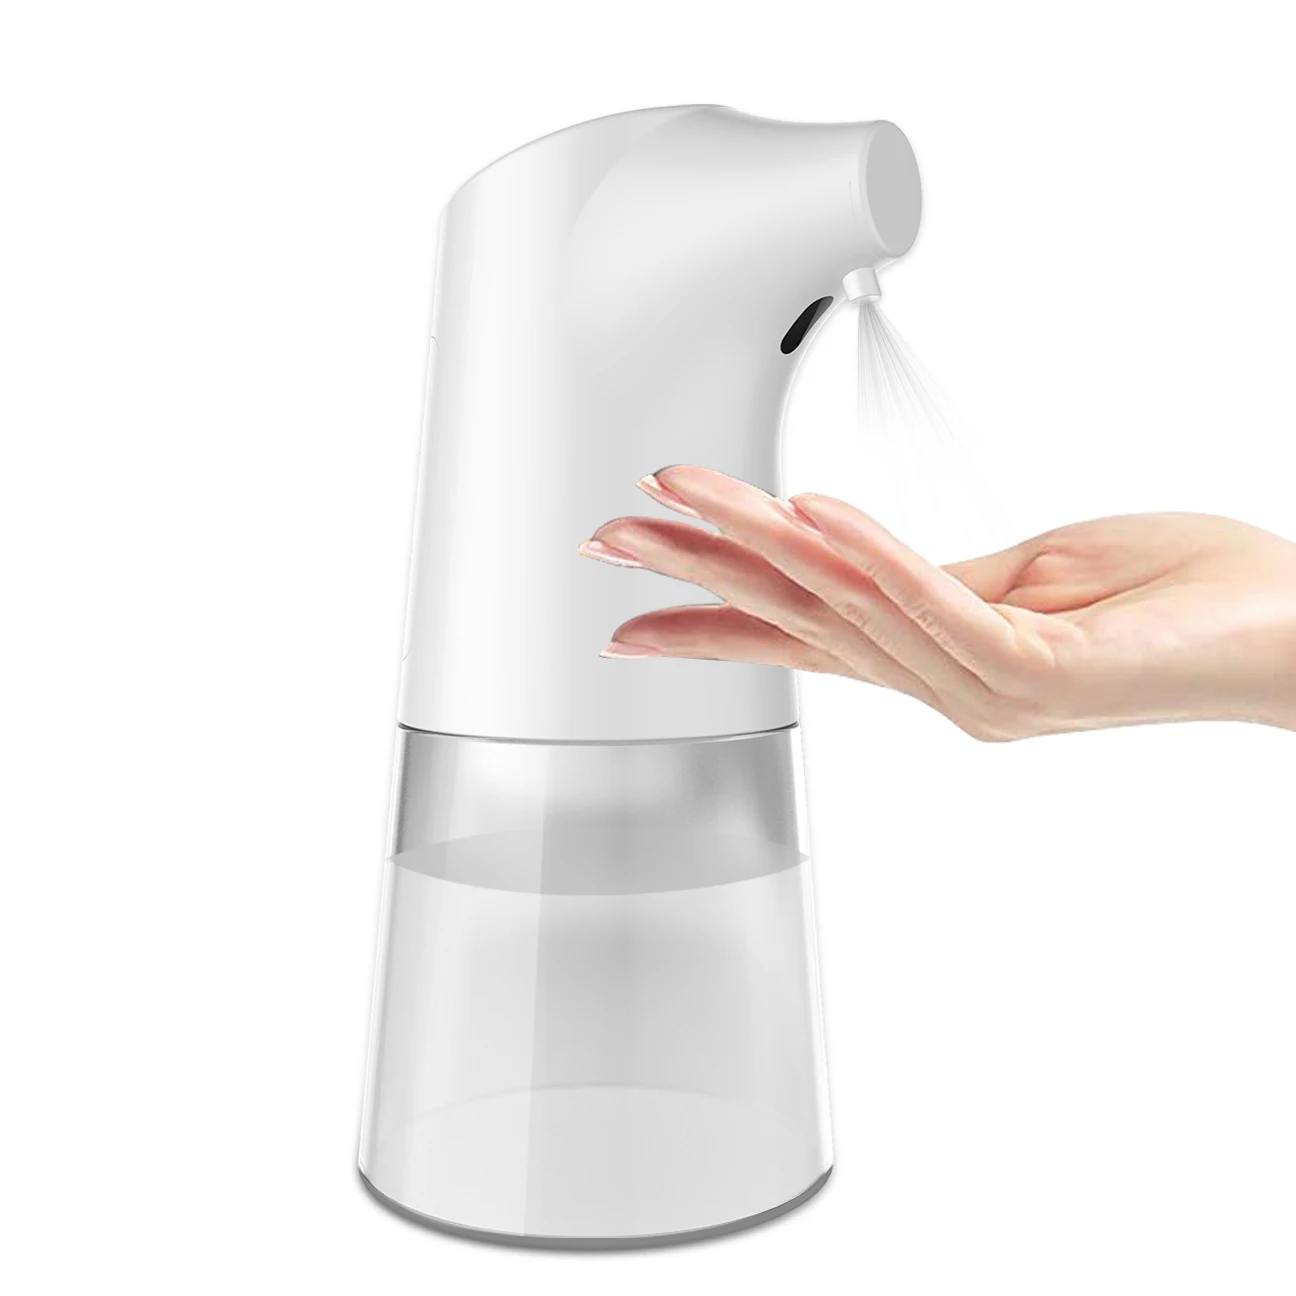 

baseus intelligent automatic liquid soap dispenser induction foaming hand washing device for kitchen bathroom (without liquid)